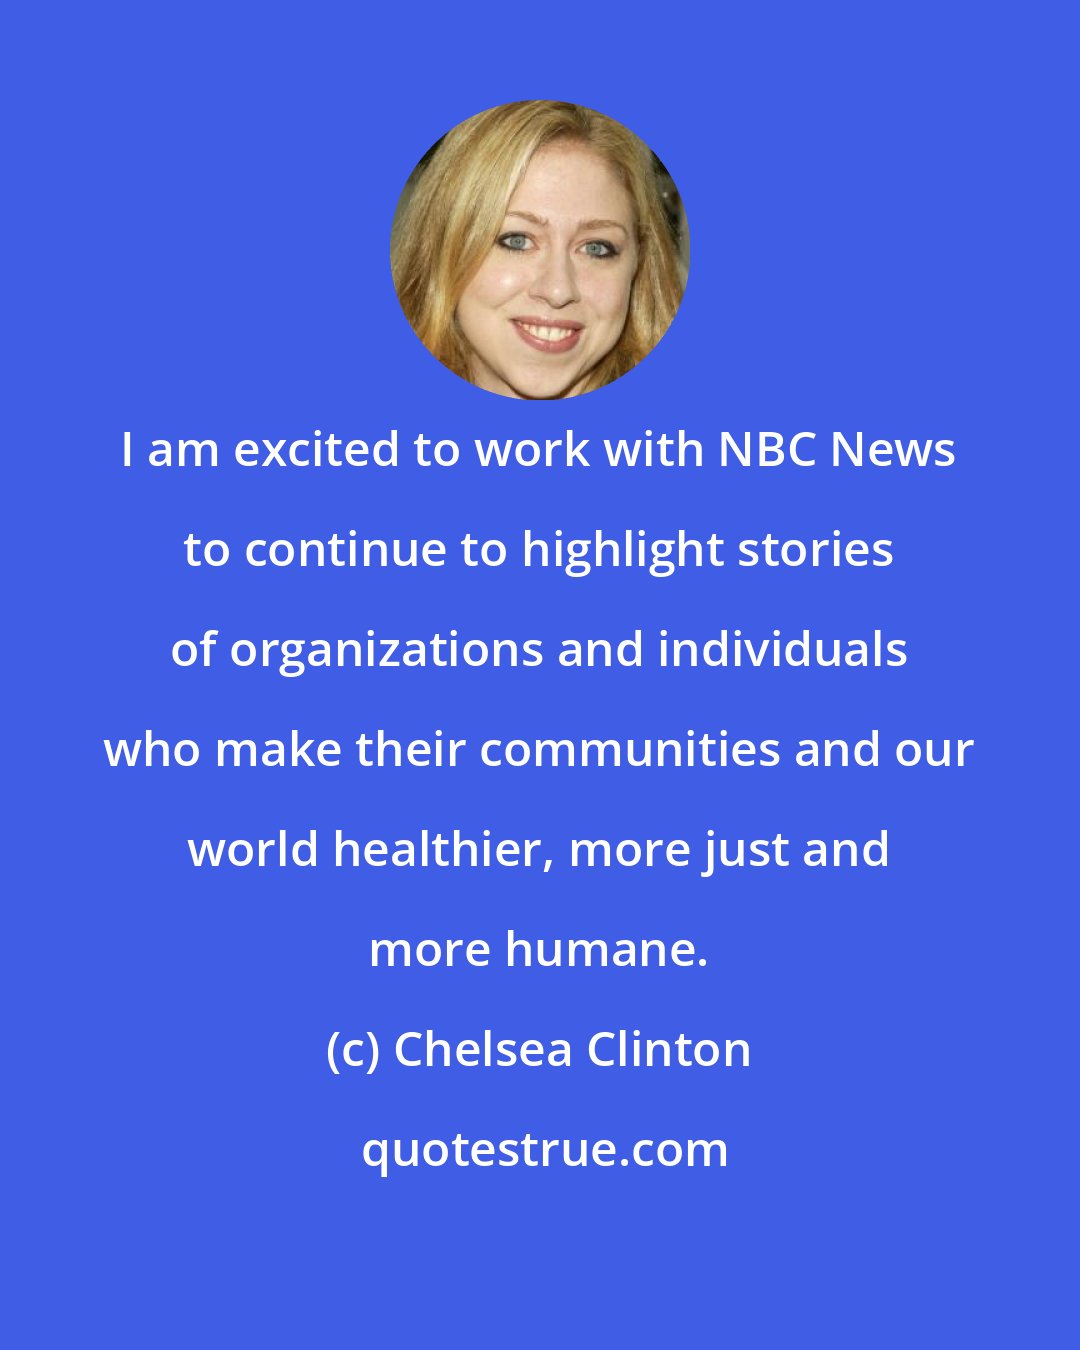 Chelsea Clinton: I am excited to work with NBC News to continue to highlight stories of organizations and individuals who make their communities and our world healthier, more just and more humane.